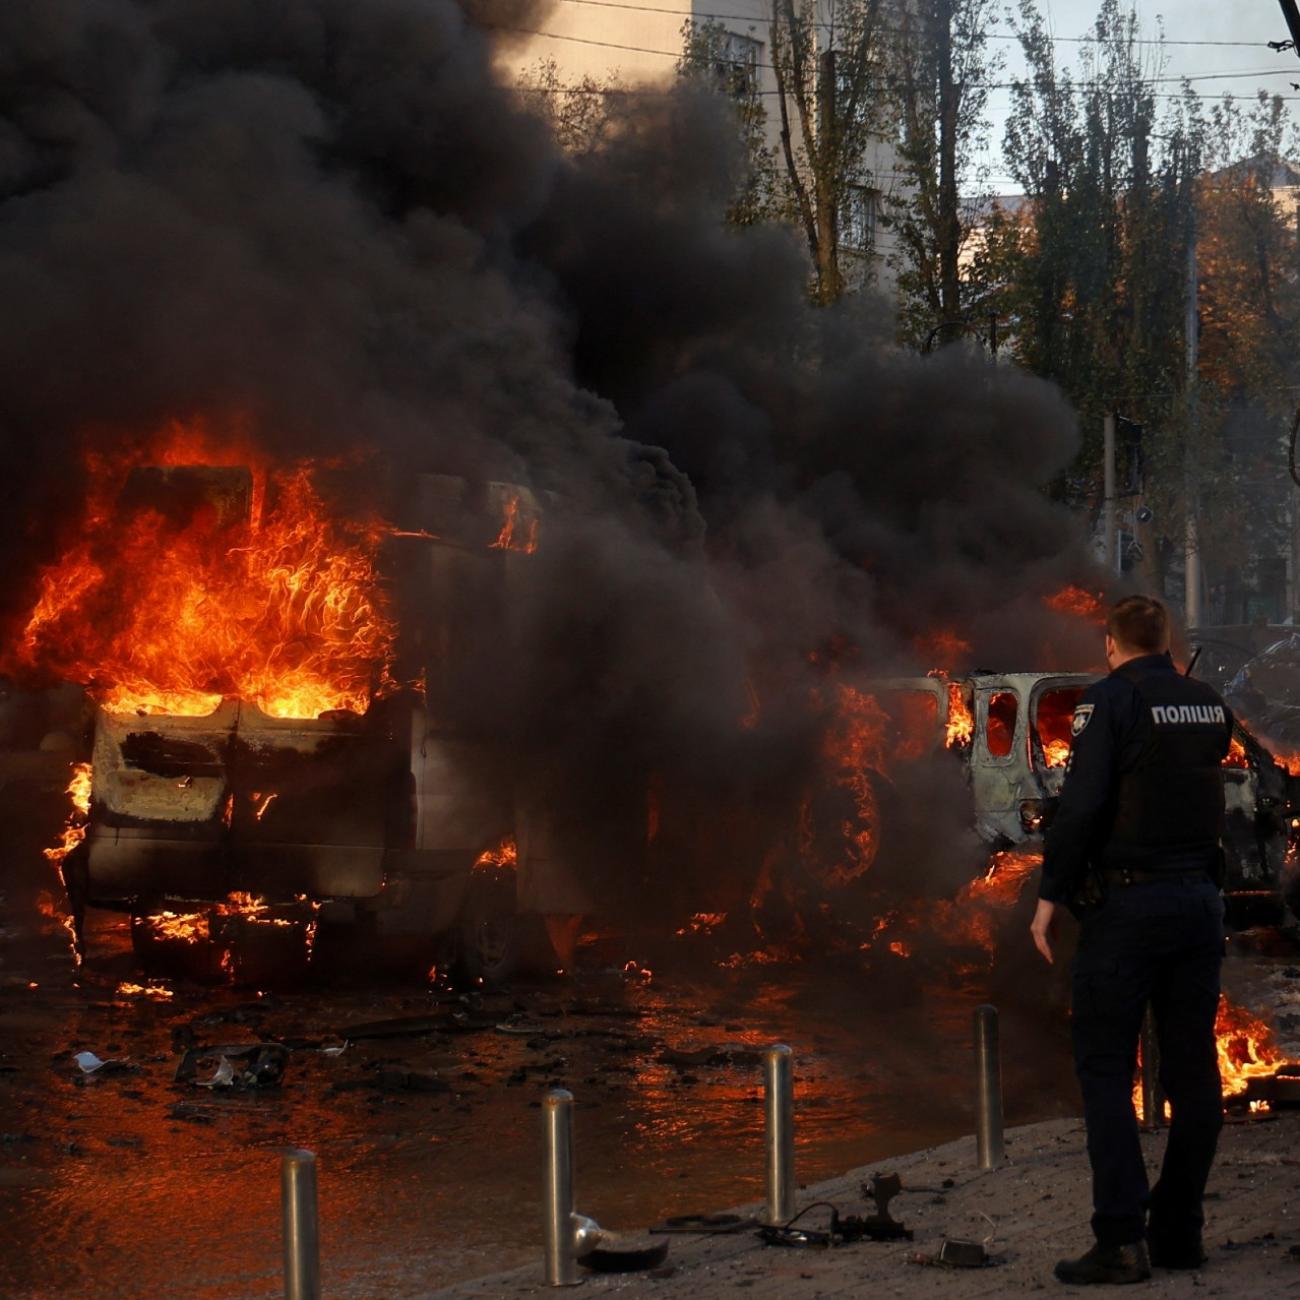 Cars are on fire after Russia's missile attack in Kyiv, Ukraine, on October 10, 2022.